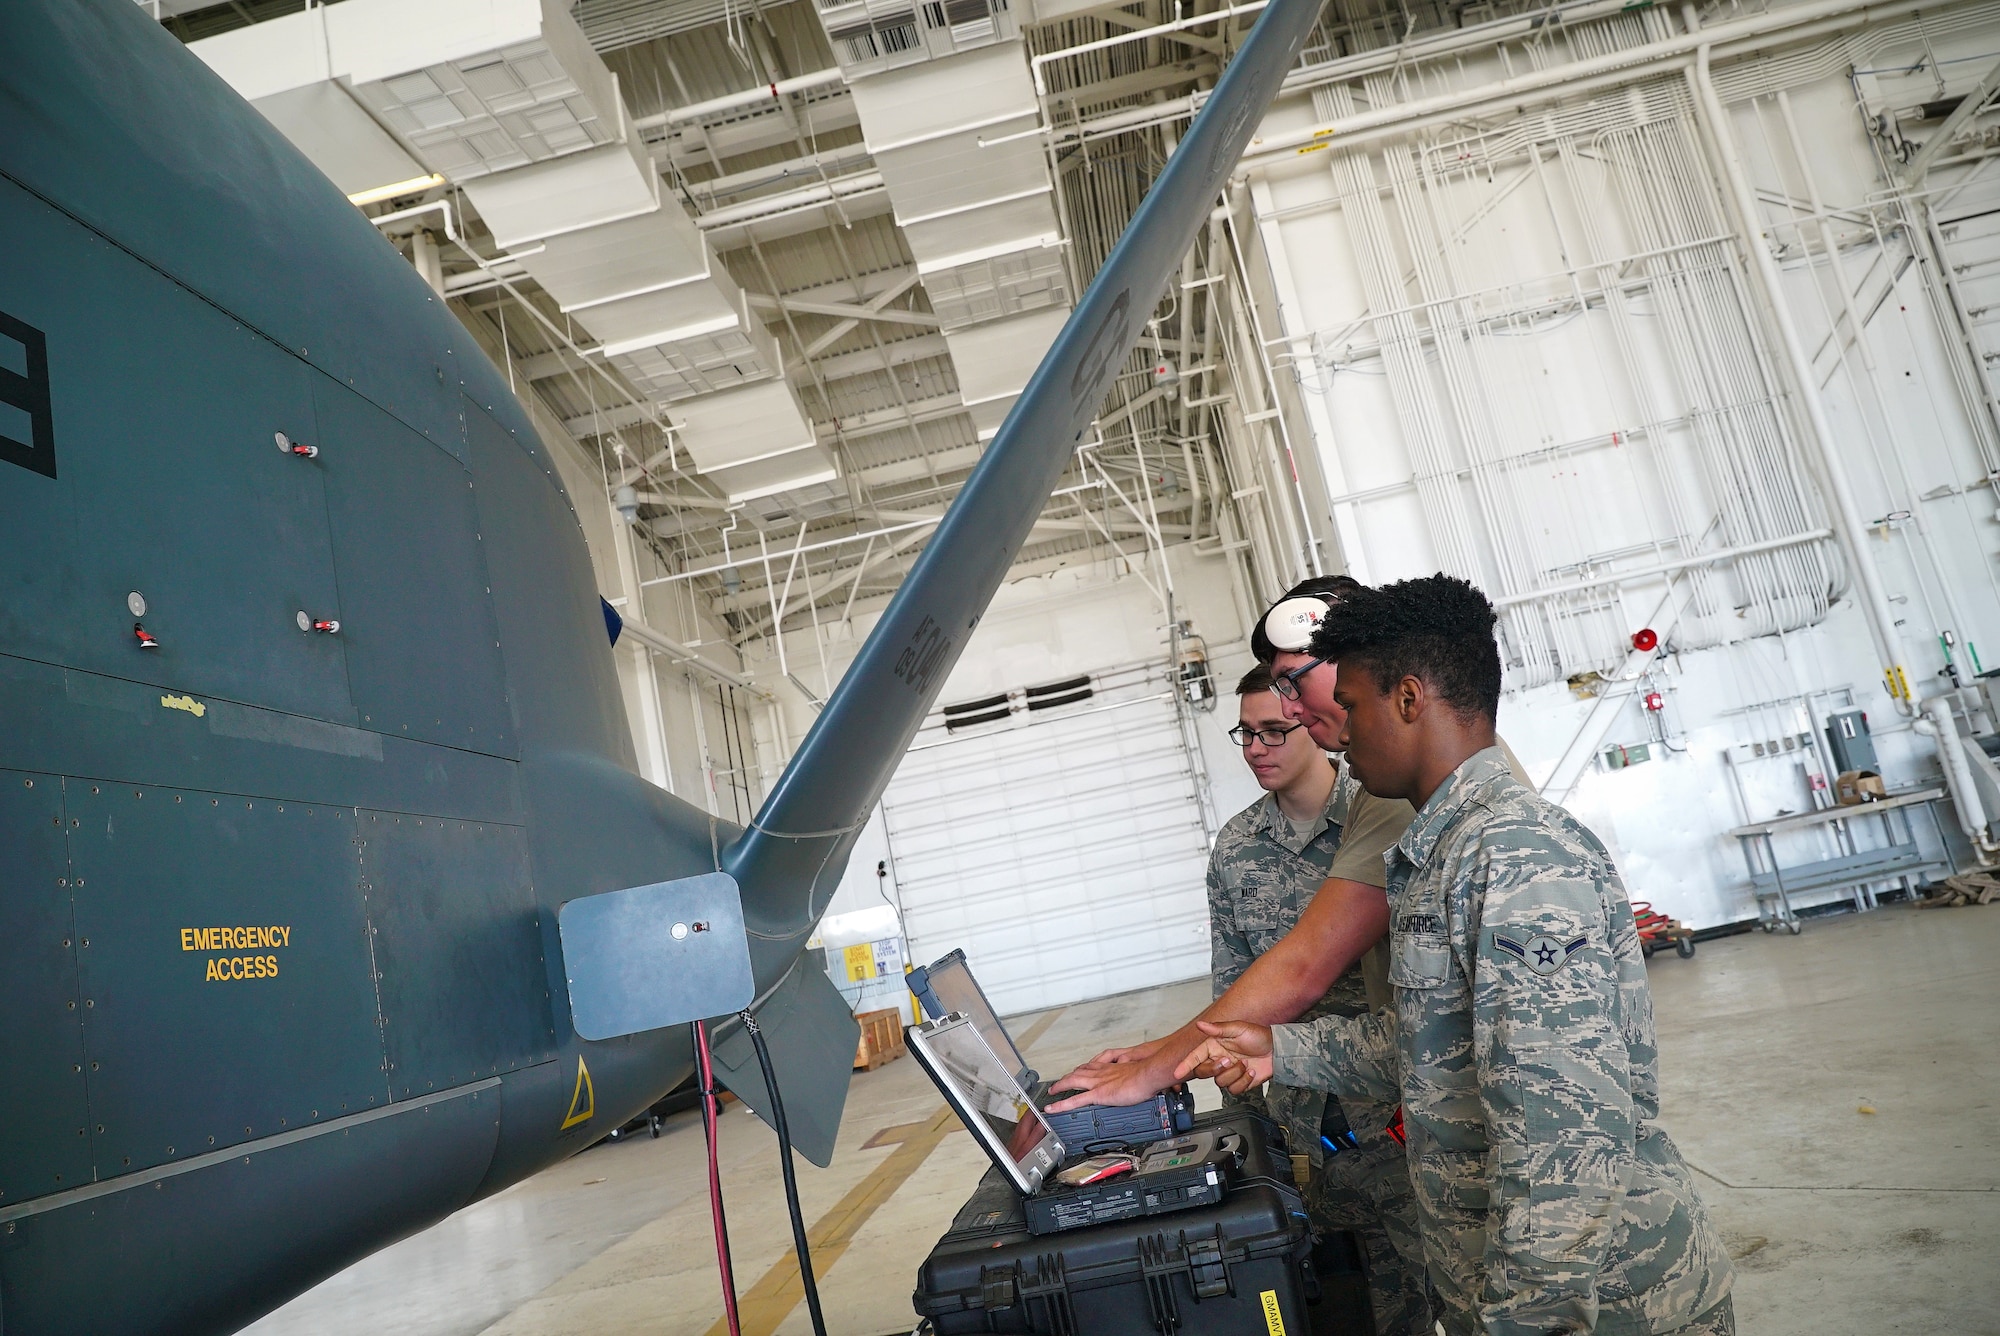 The side of a small unmanned aircraft is shown on the left-hand side of the frame, as three uniformed military members stand near it with a laptop in front of them.